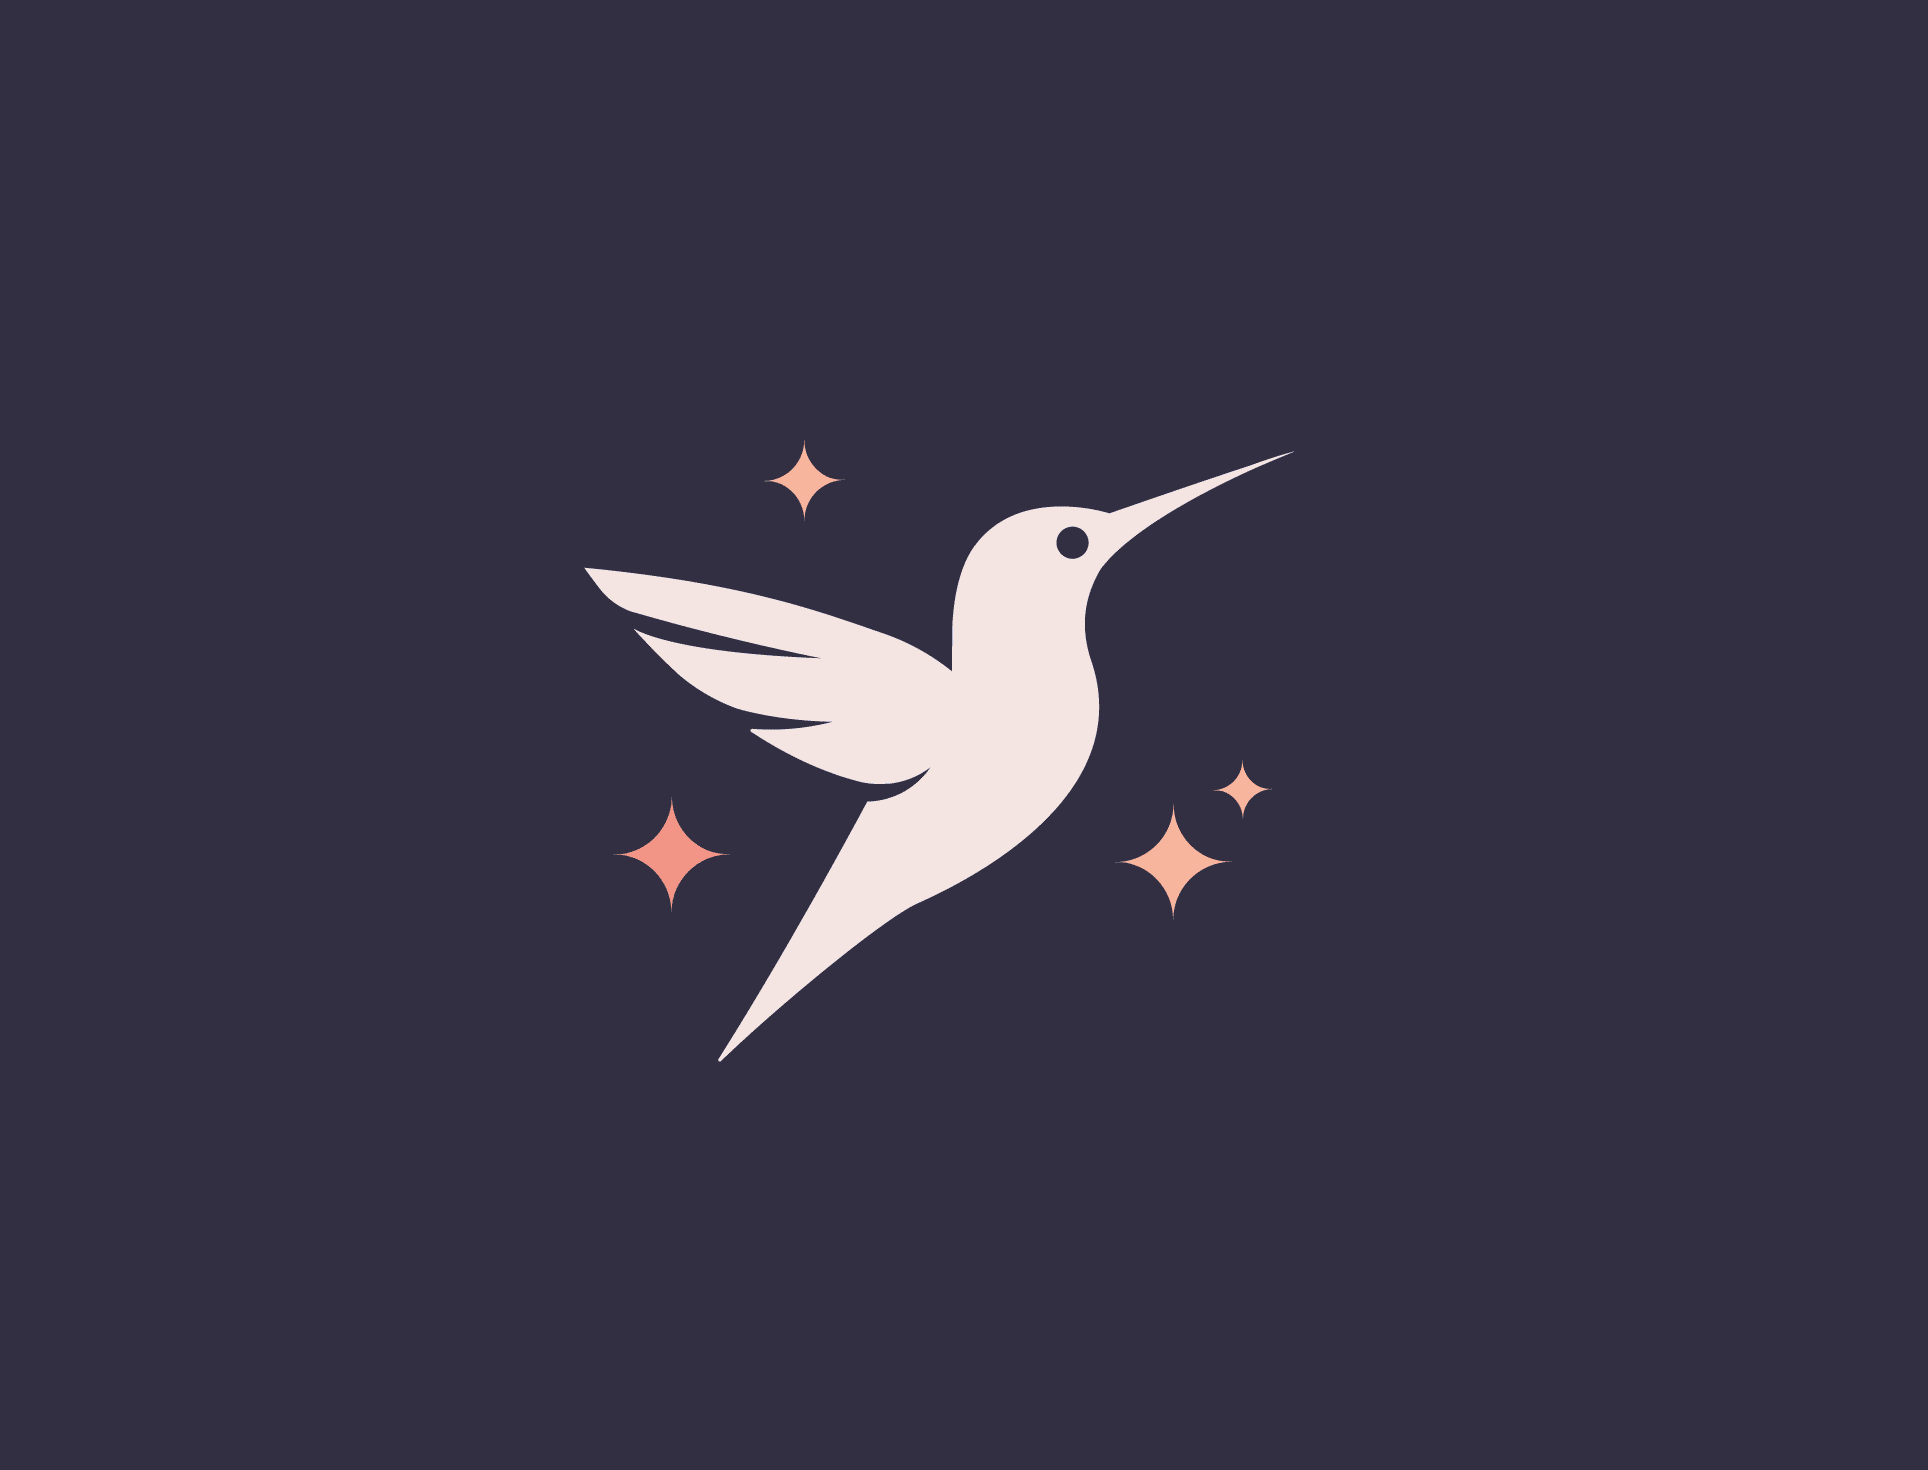 Final flying hummingbird logo with animated sparkles around it